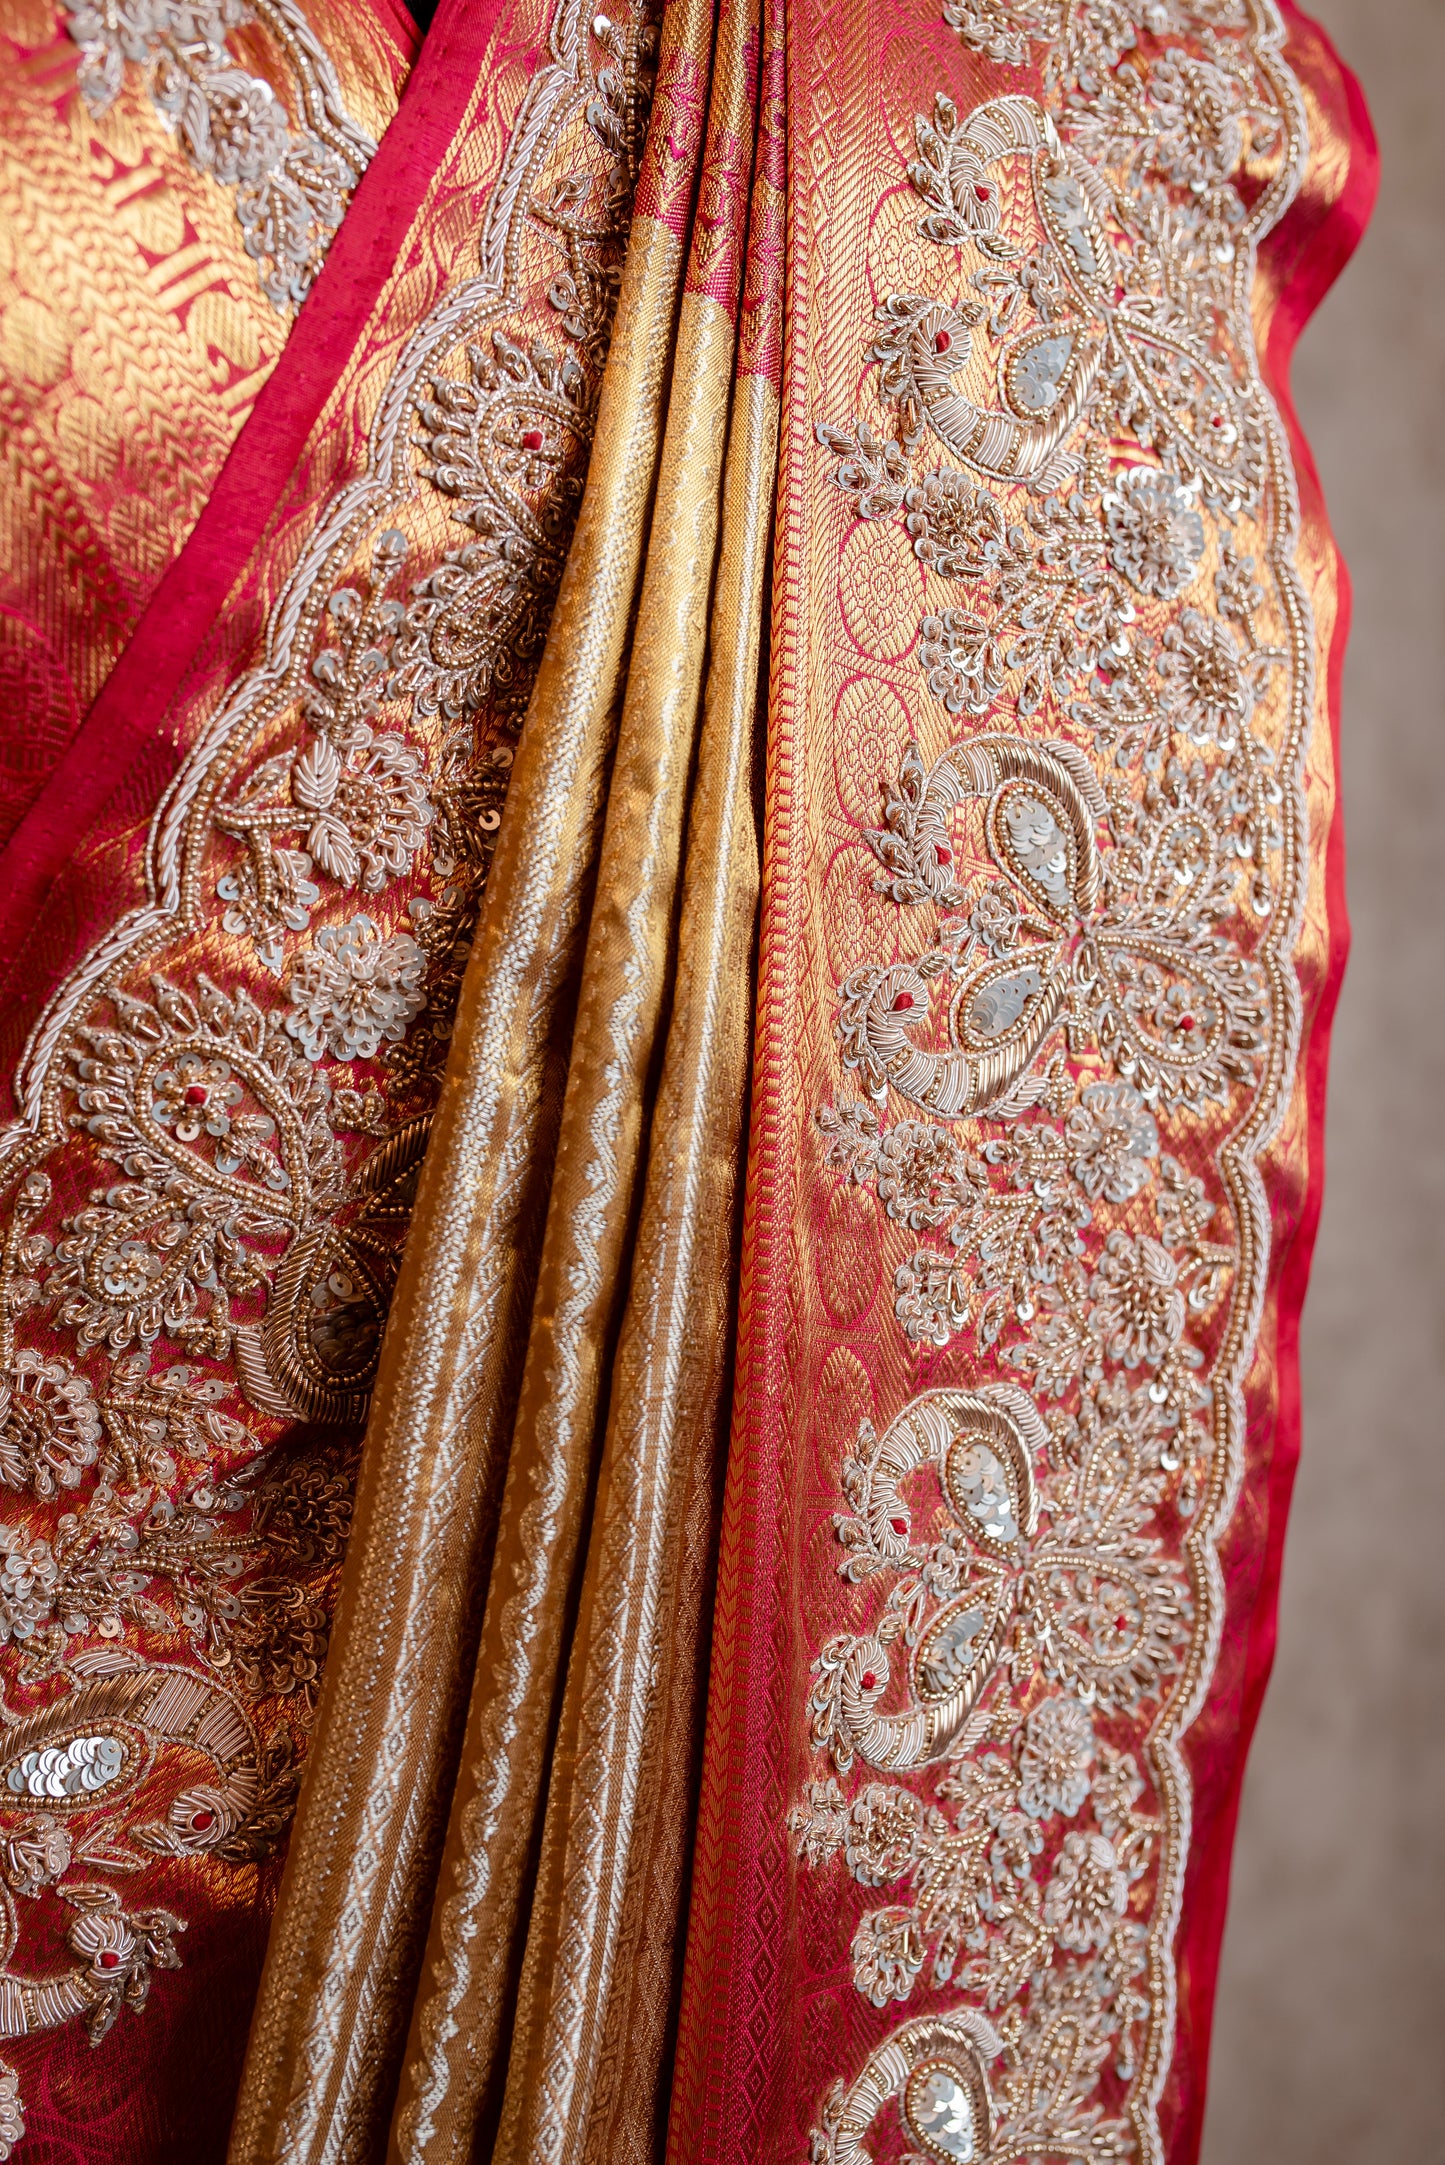 A PURE GOLD AND RED ZARI WOVEN EMBROIDERED SAREE SS-887